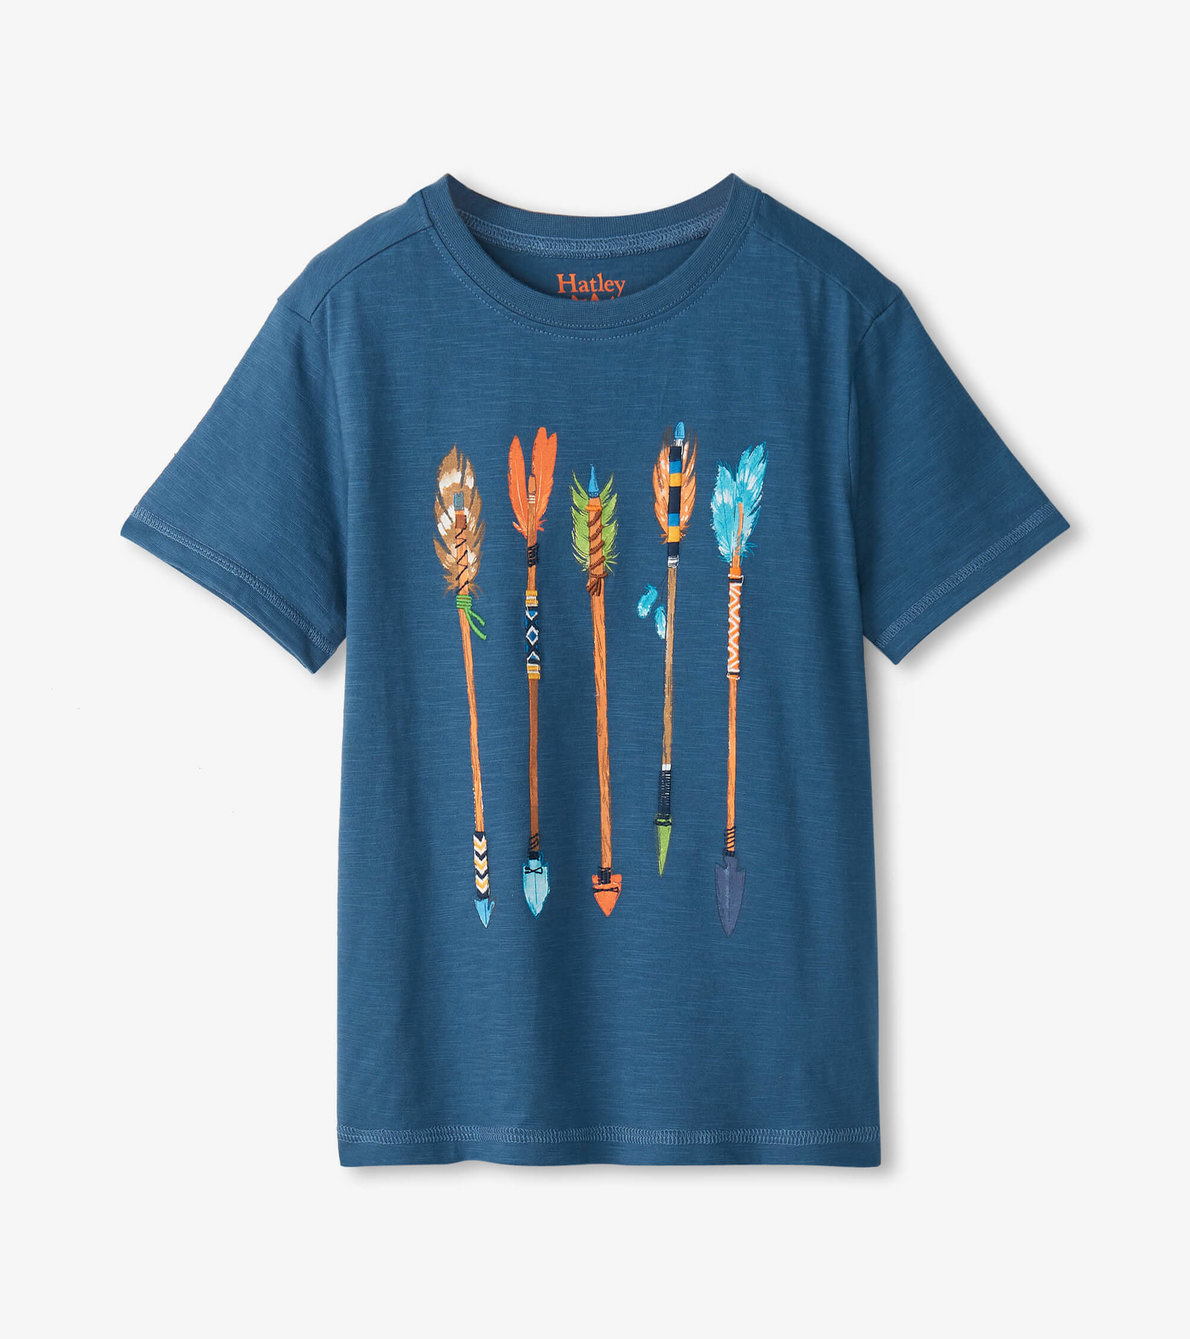 View larger image of Boys Arrows Graphic Tee